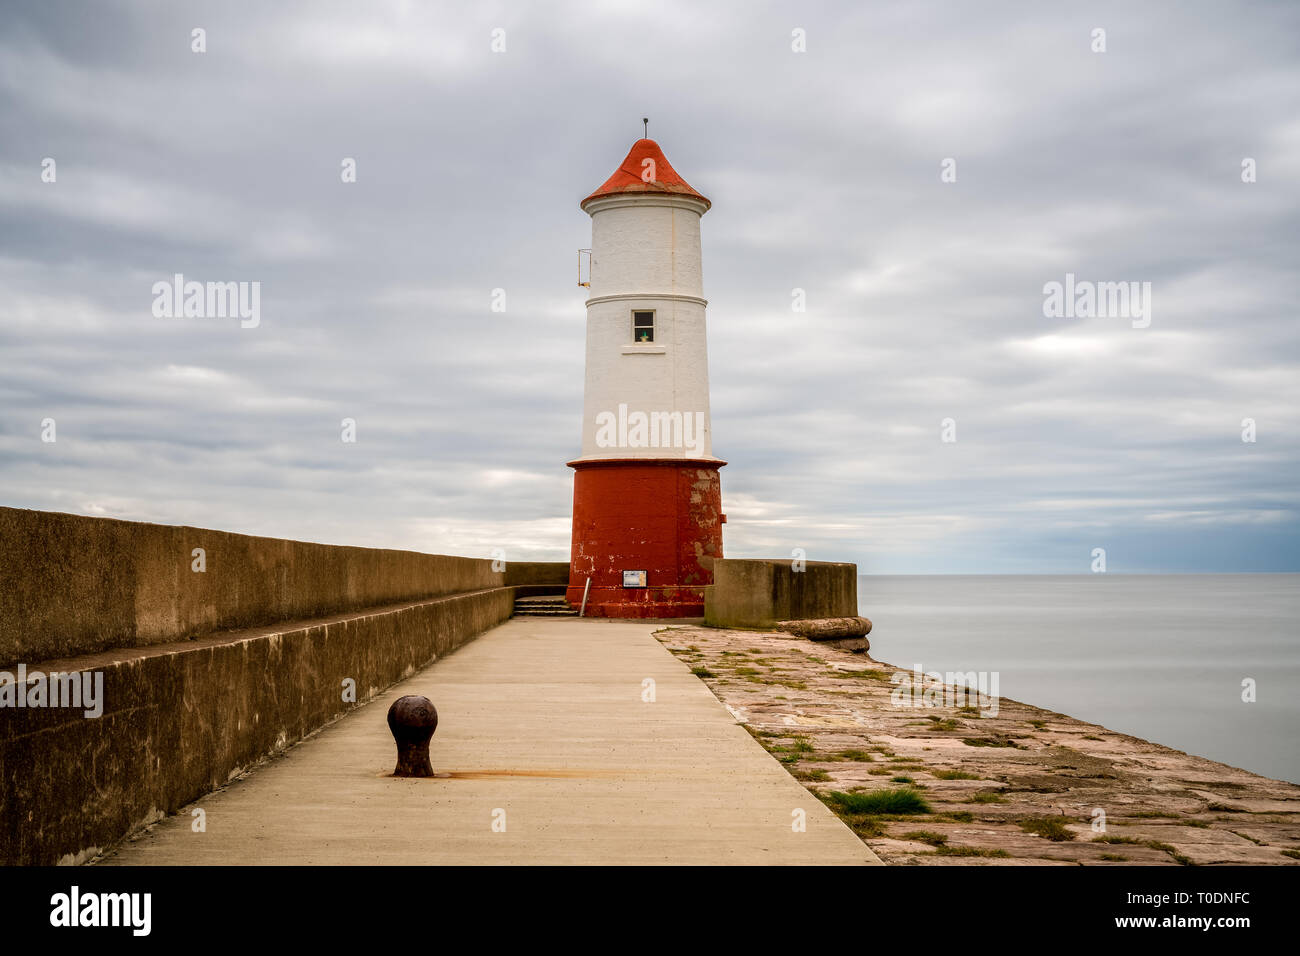 Berwick-upon-Tweed, Northumberland, England, UK - September 08, 2018: The Lighthouse seen from the Pier Stock Photo